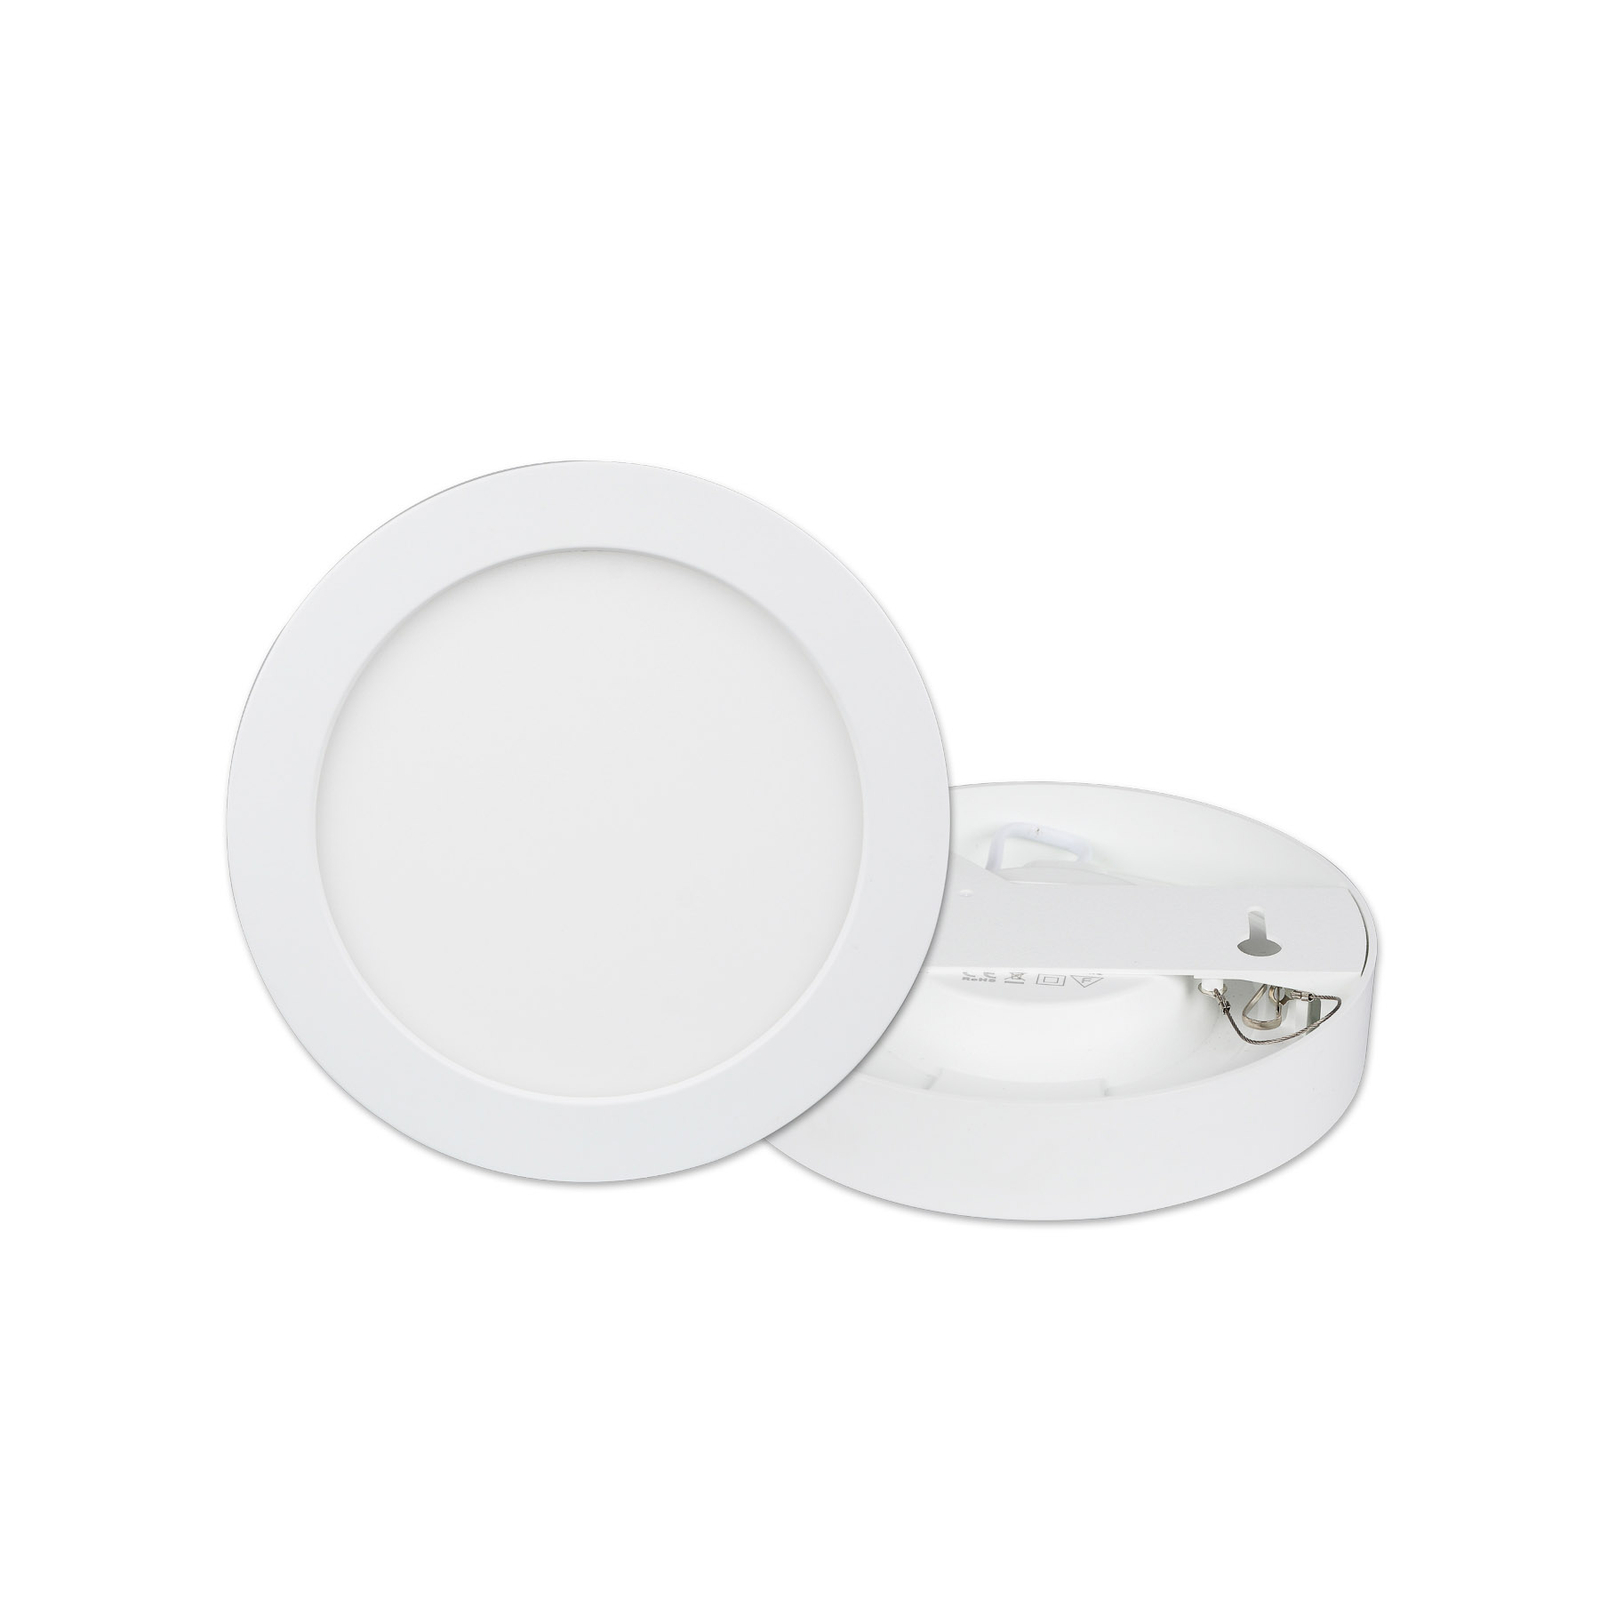 Prios LED ceiling lamp Edwina, white, 17.7cm, 2pcs, dimmable